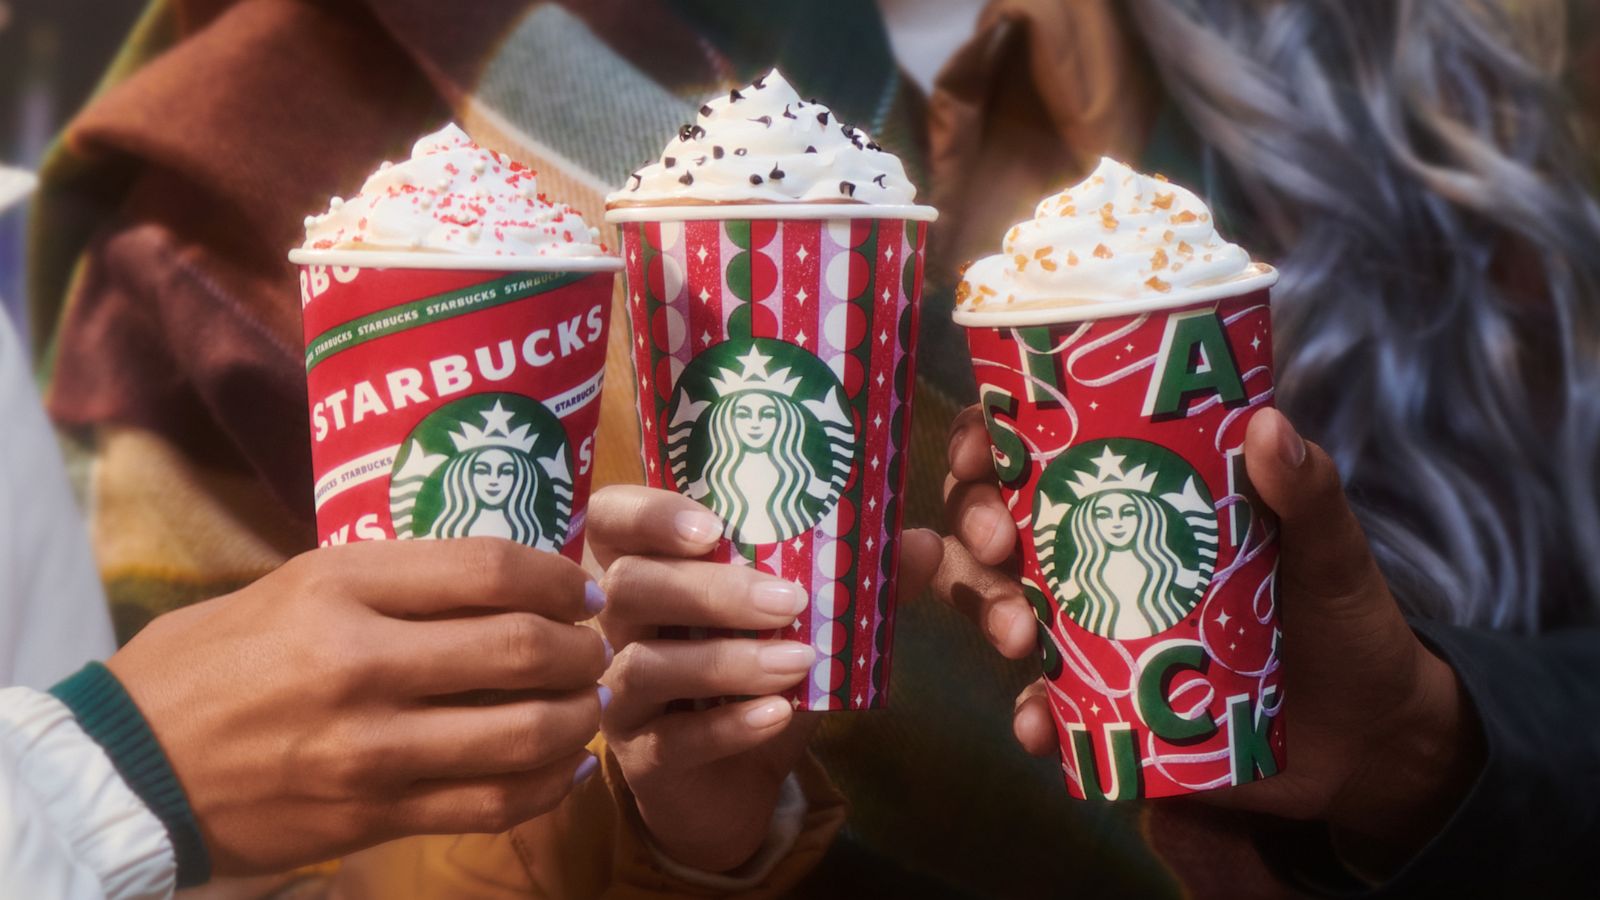 Jewel-toned tumblers, color-changing hot cups and more in Starbucks new  holiday collection - ABC News